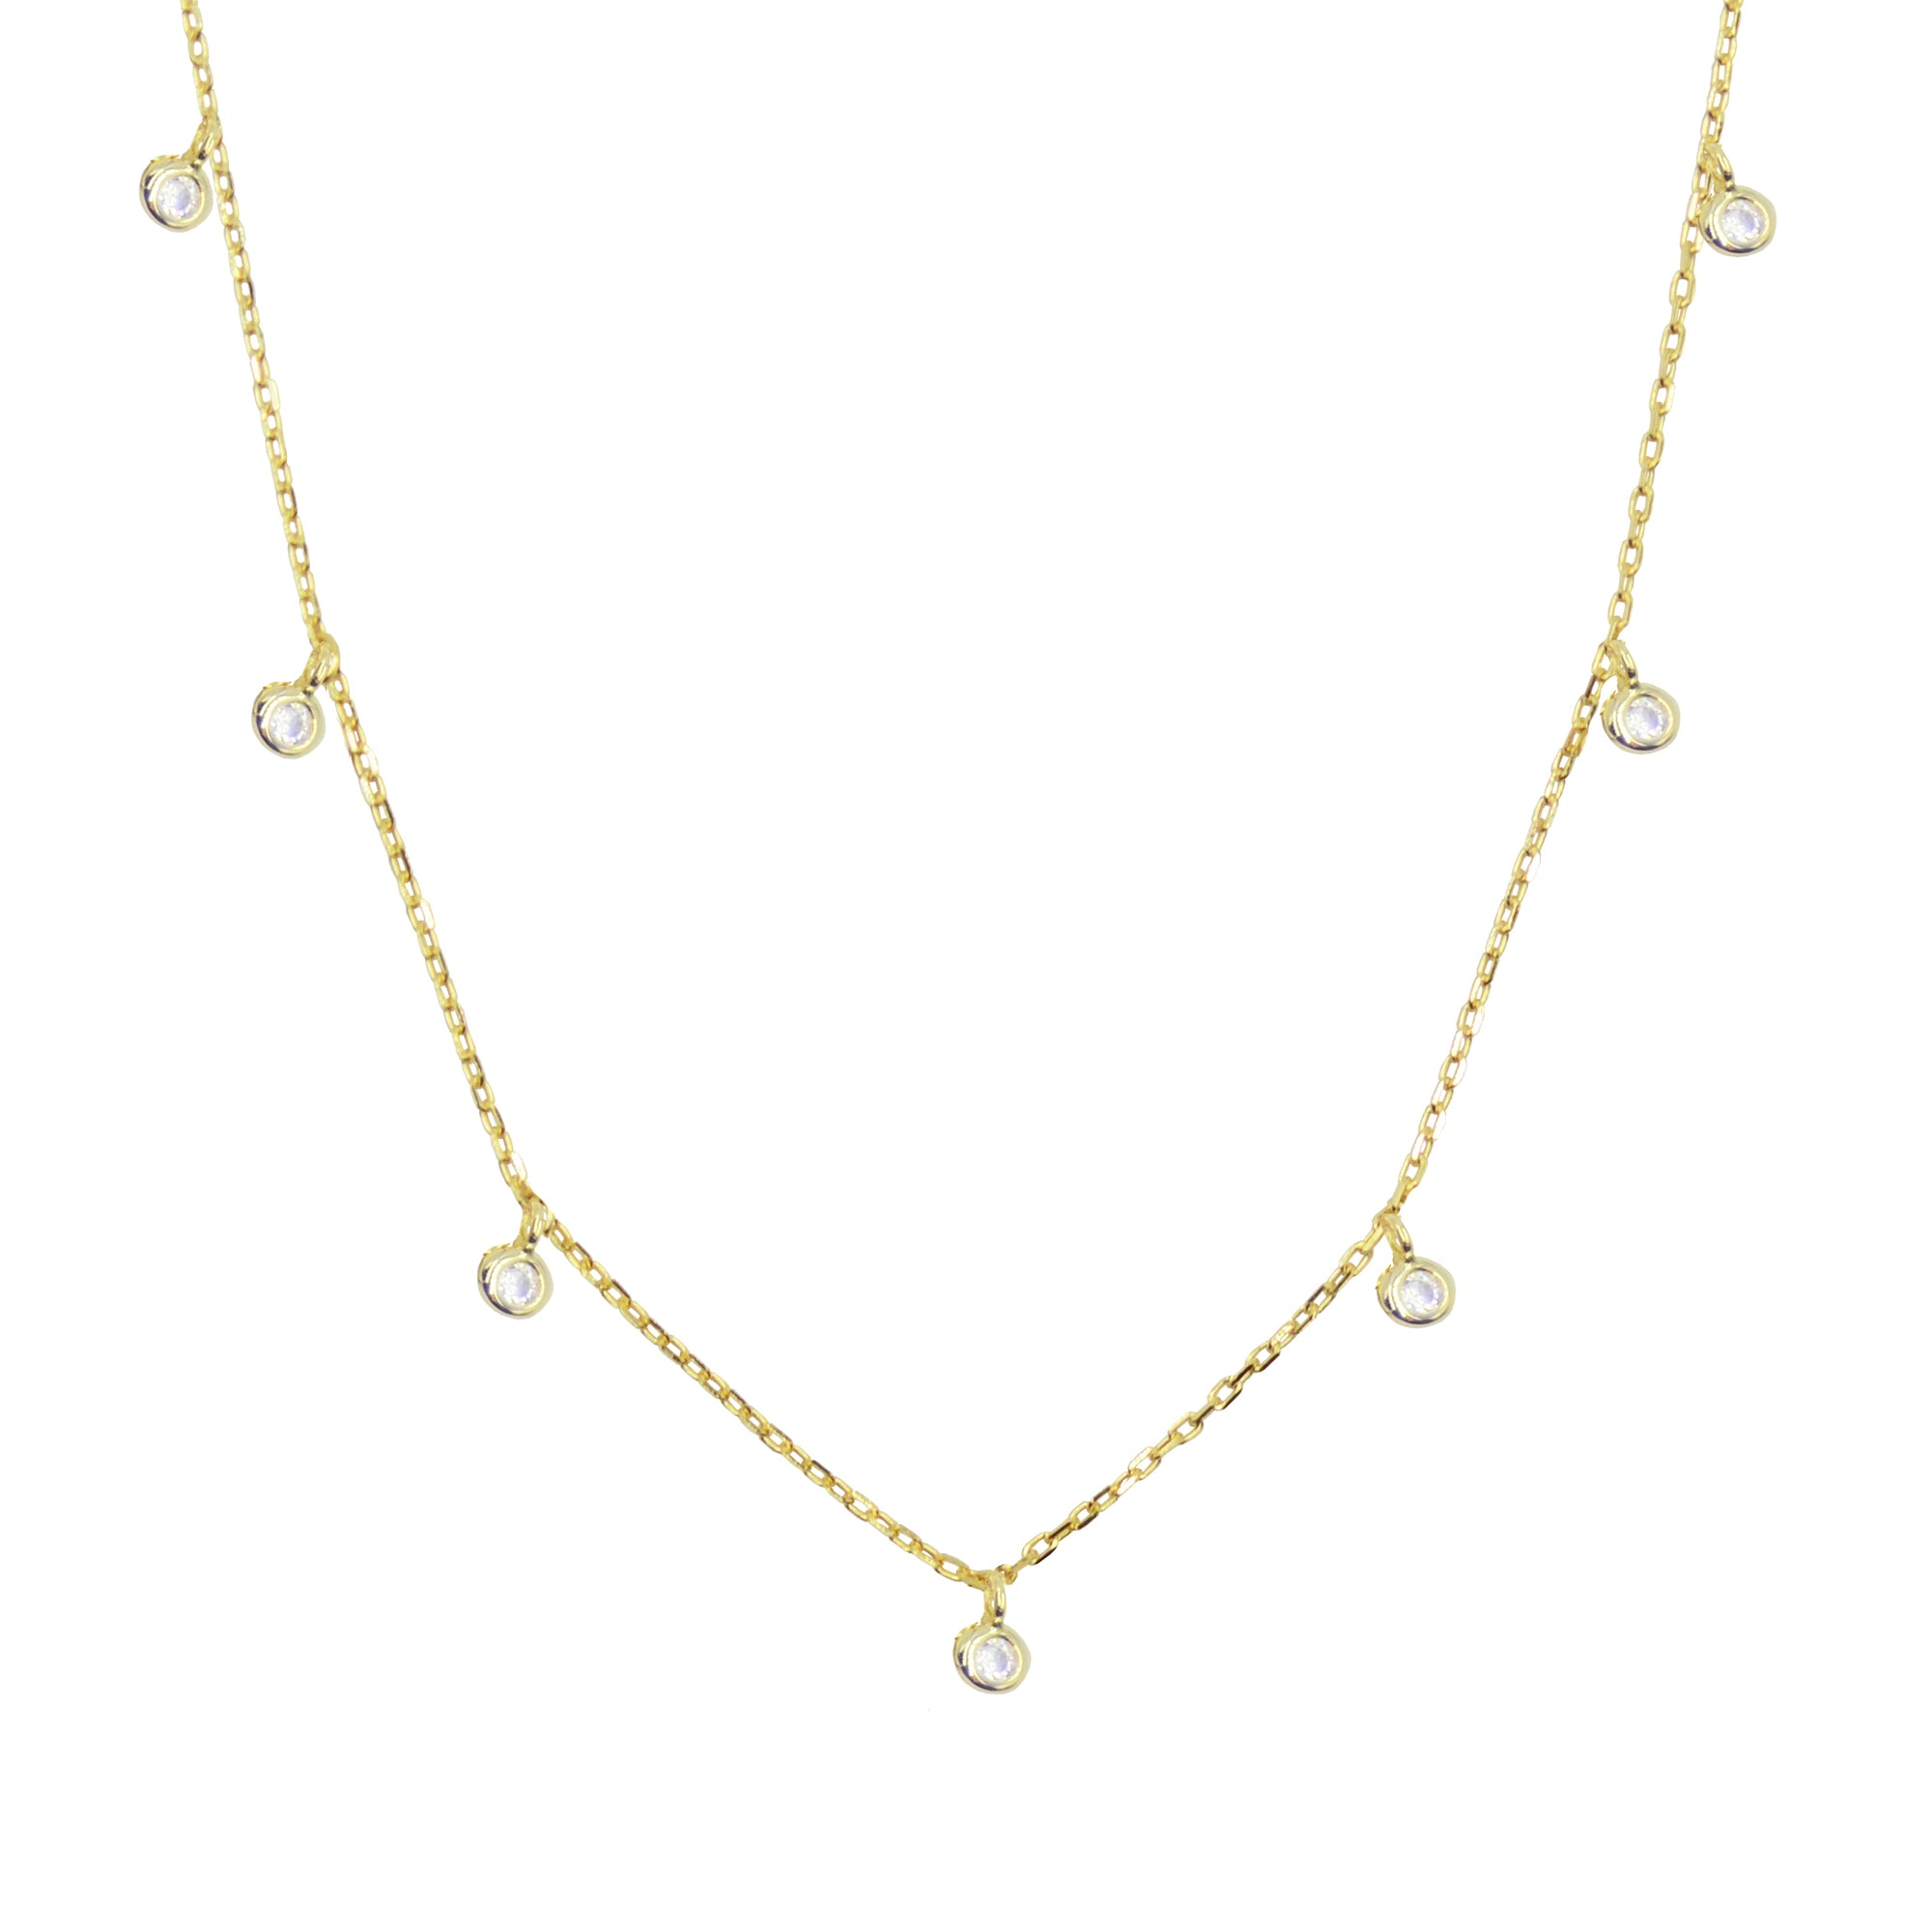 Dew drops crystal choker layering necklace in yellow gold